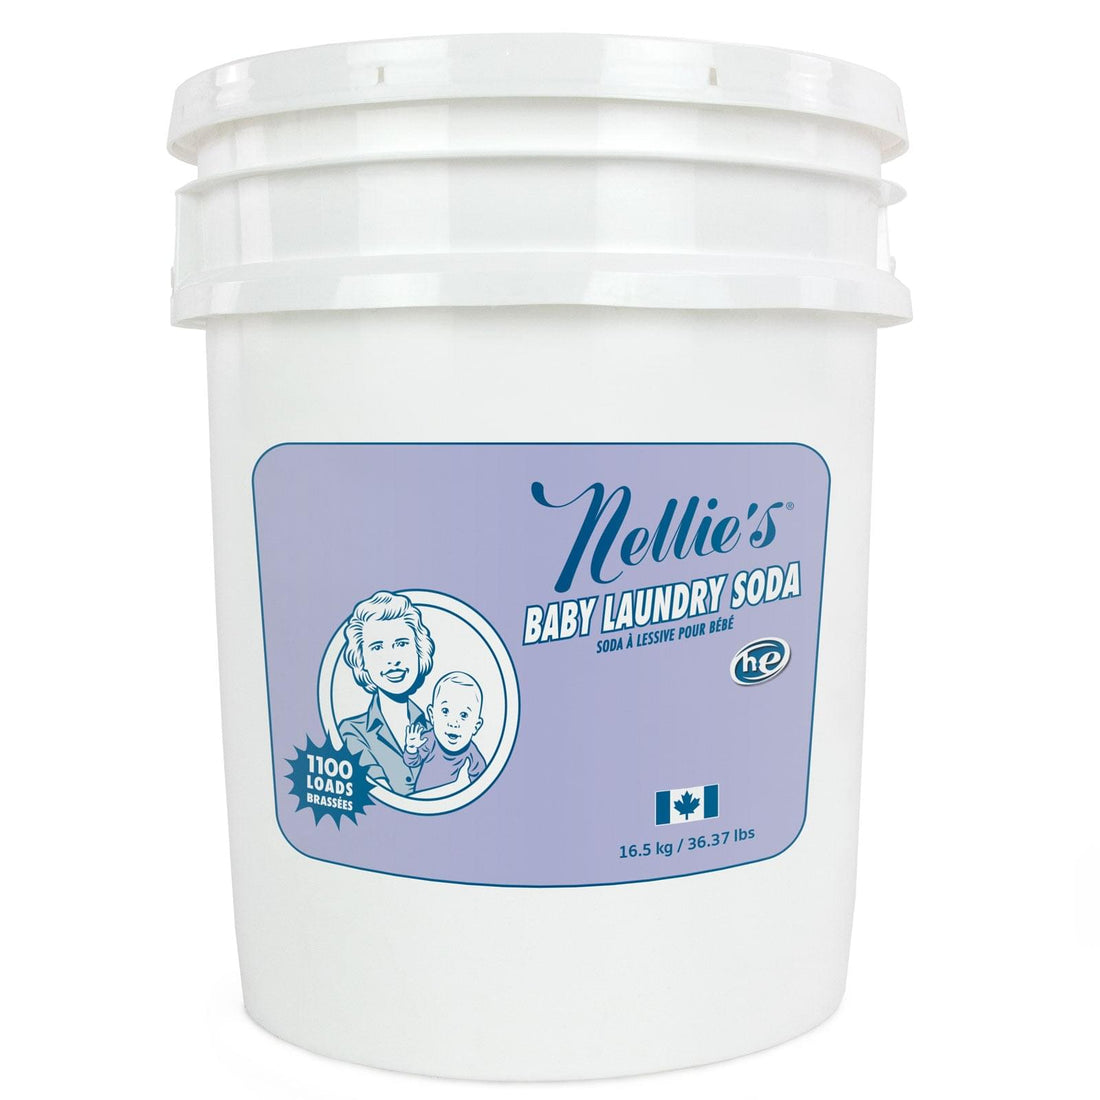 Eco-friendly Baby Laundry Detergent 1100 Loads in a resealable bulk bucket